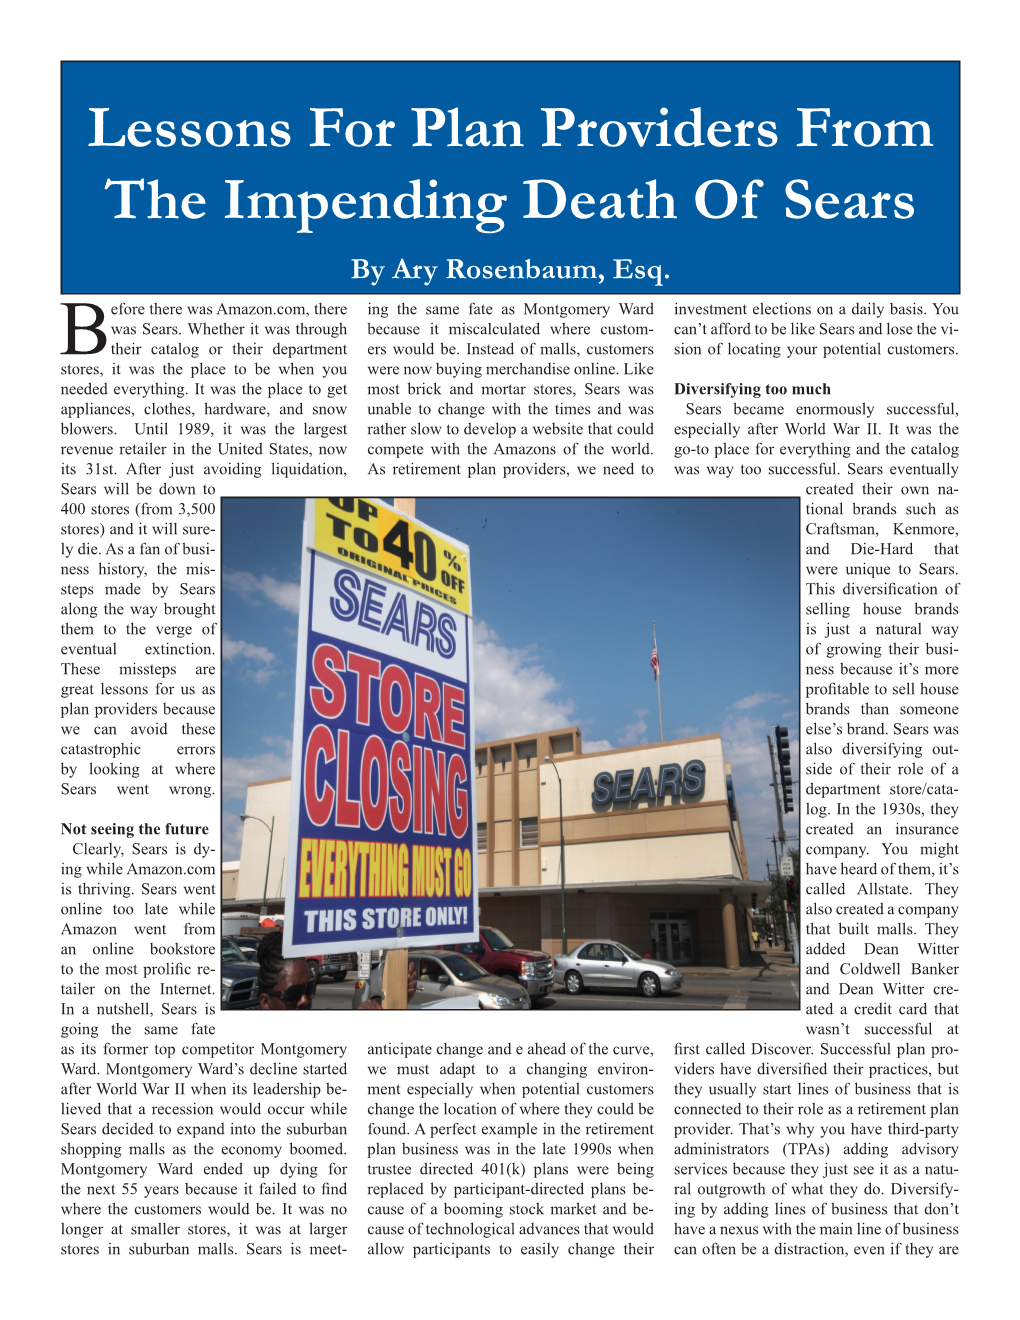 Lessons for Plan Providers from the Impending Death of Sears by Ary Rosenbaum, Esq